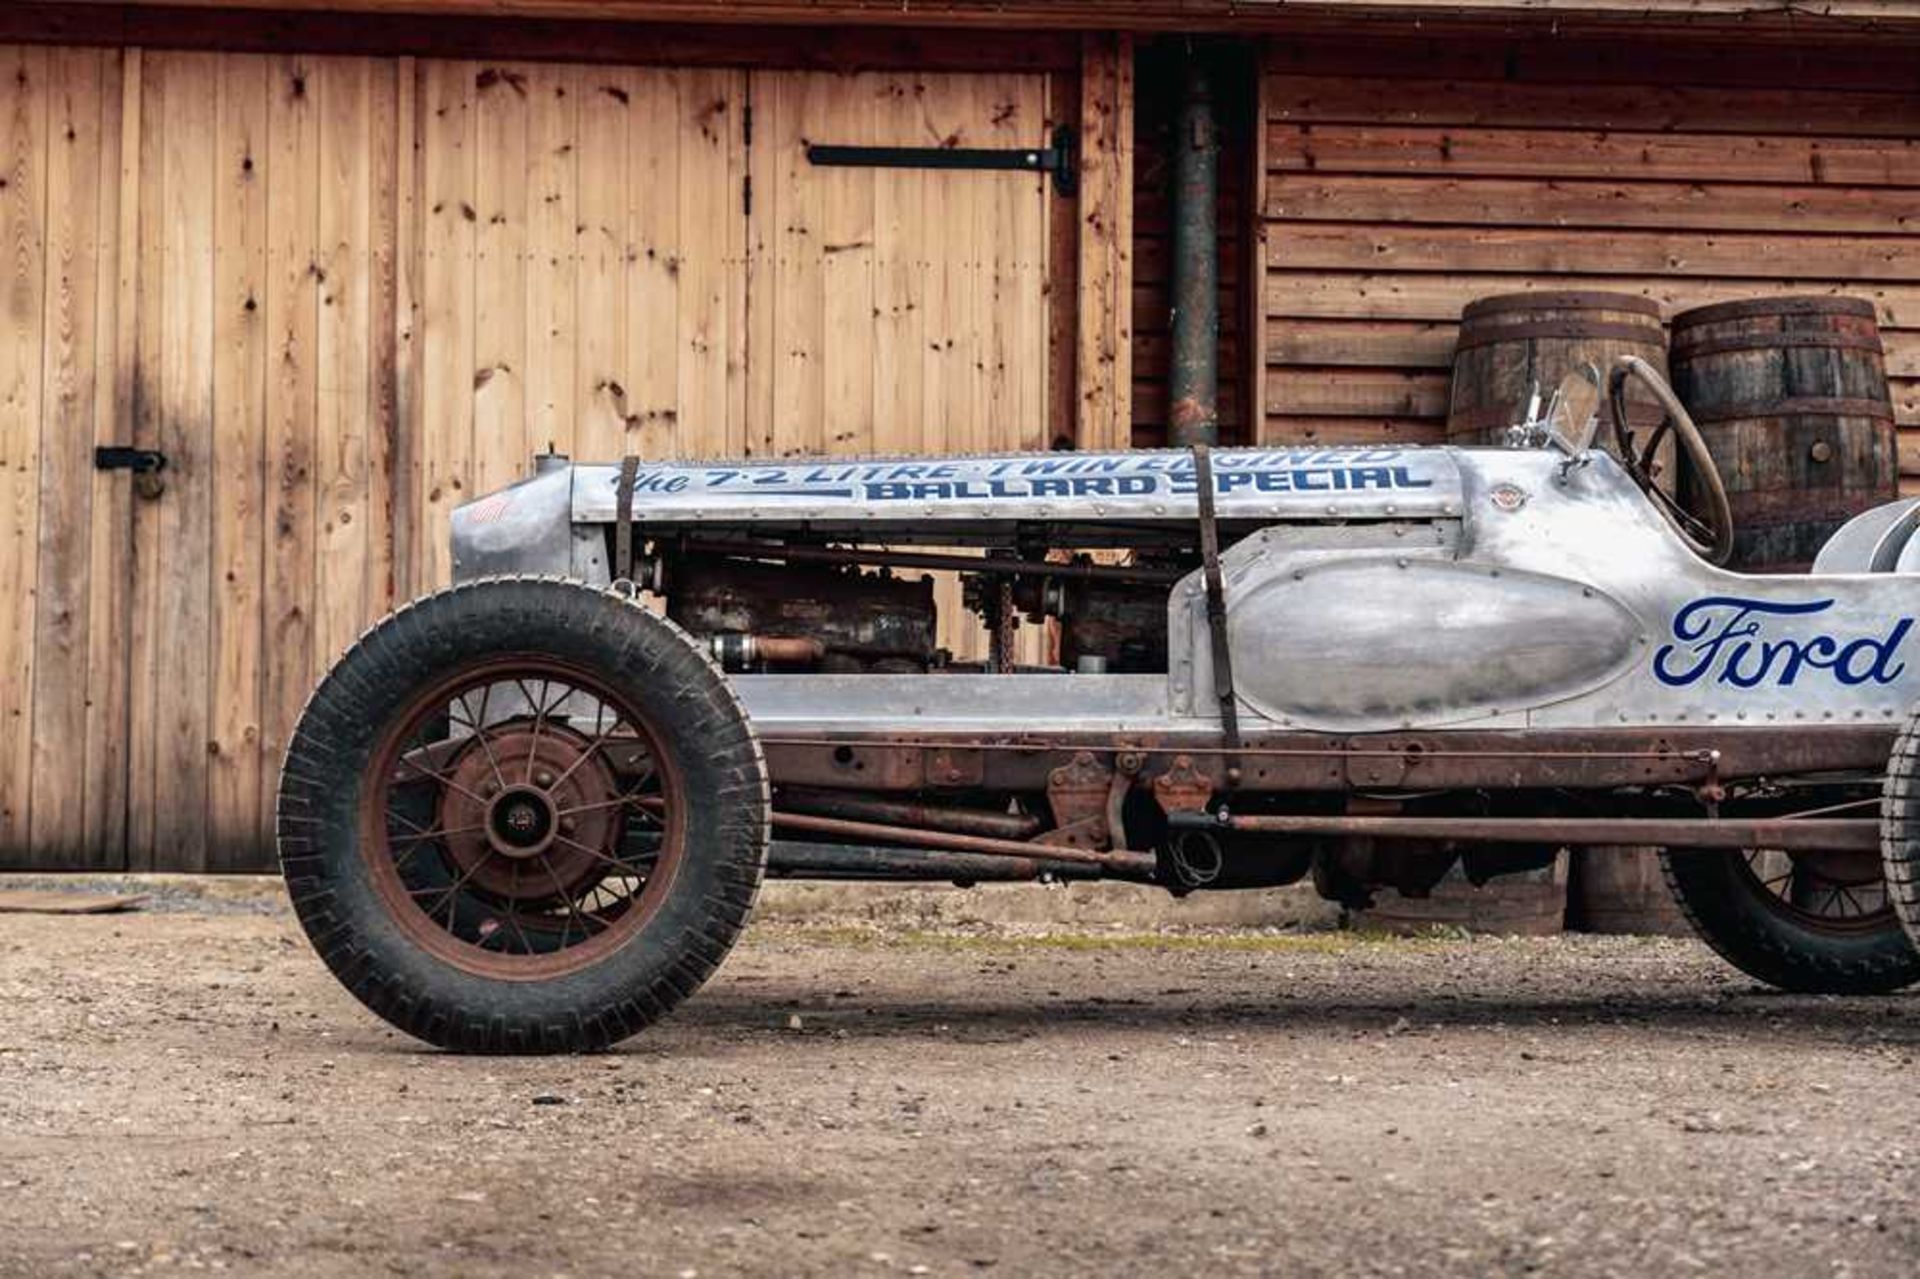 1930 Ford Model A "The Ballard Special" Speedster One off, bespoke built twin-engined pre-war racing - Image 56 of 94